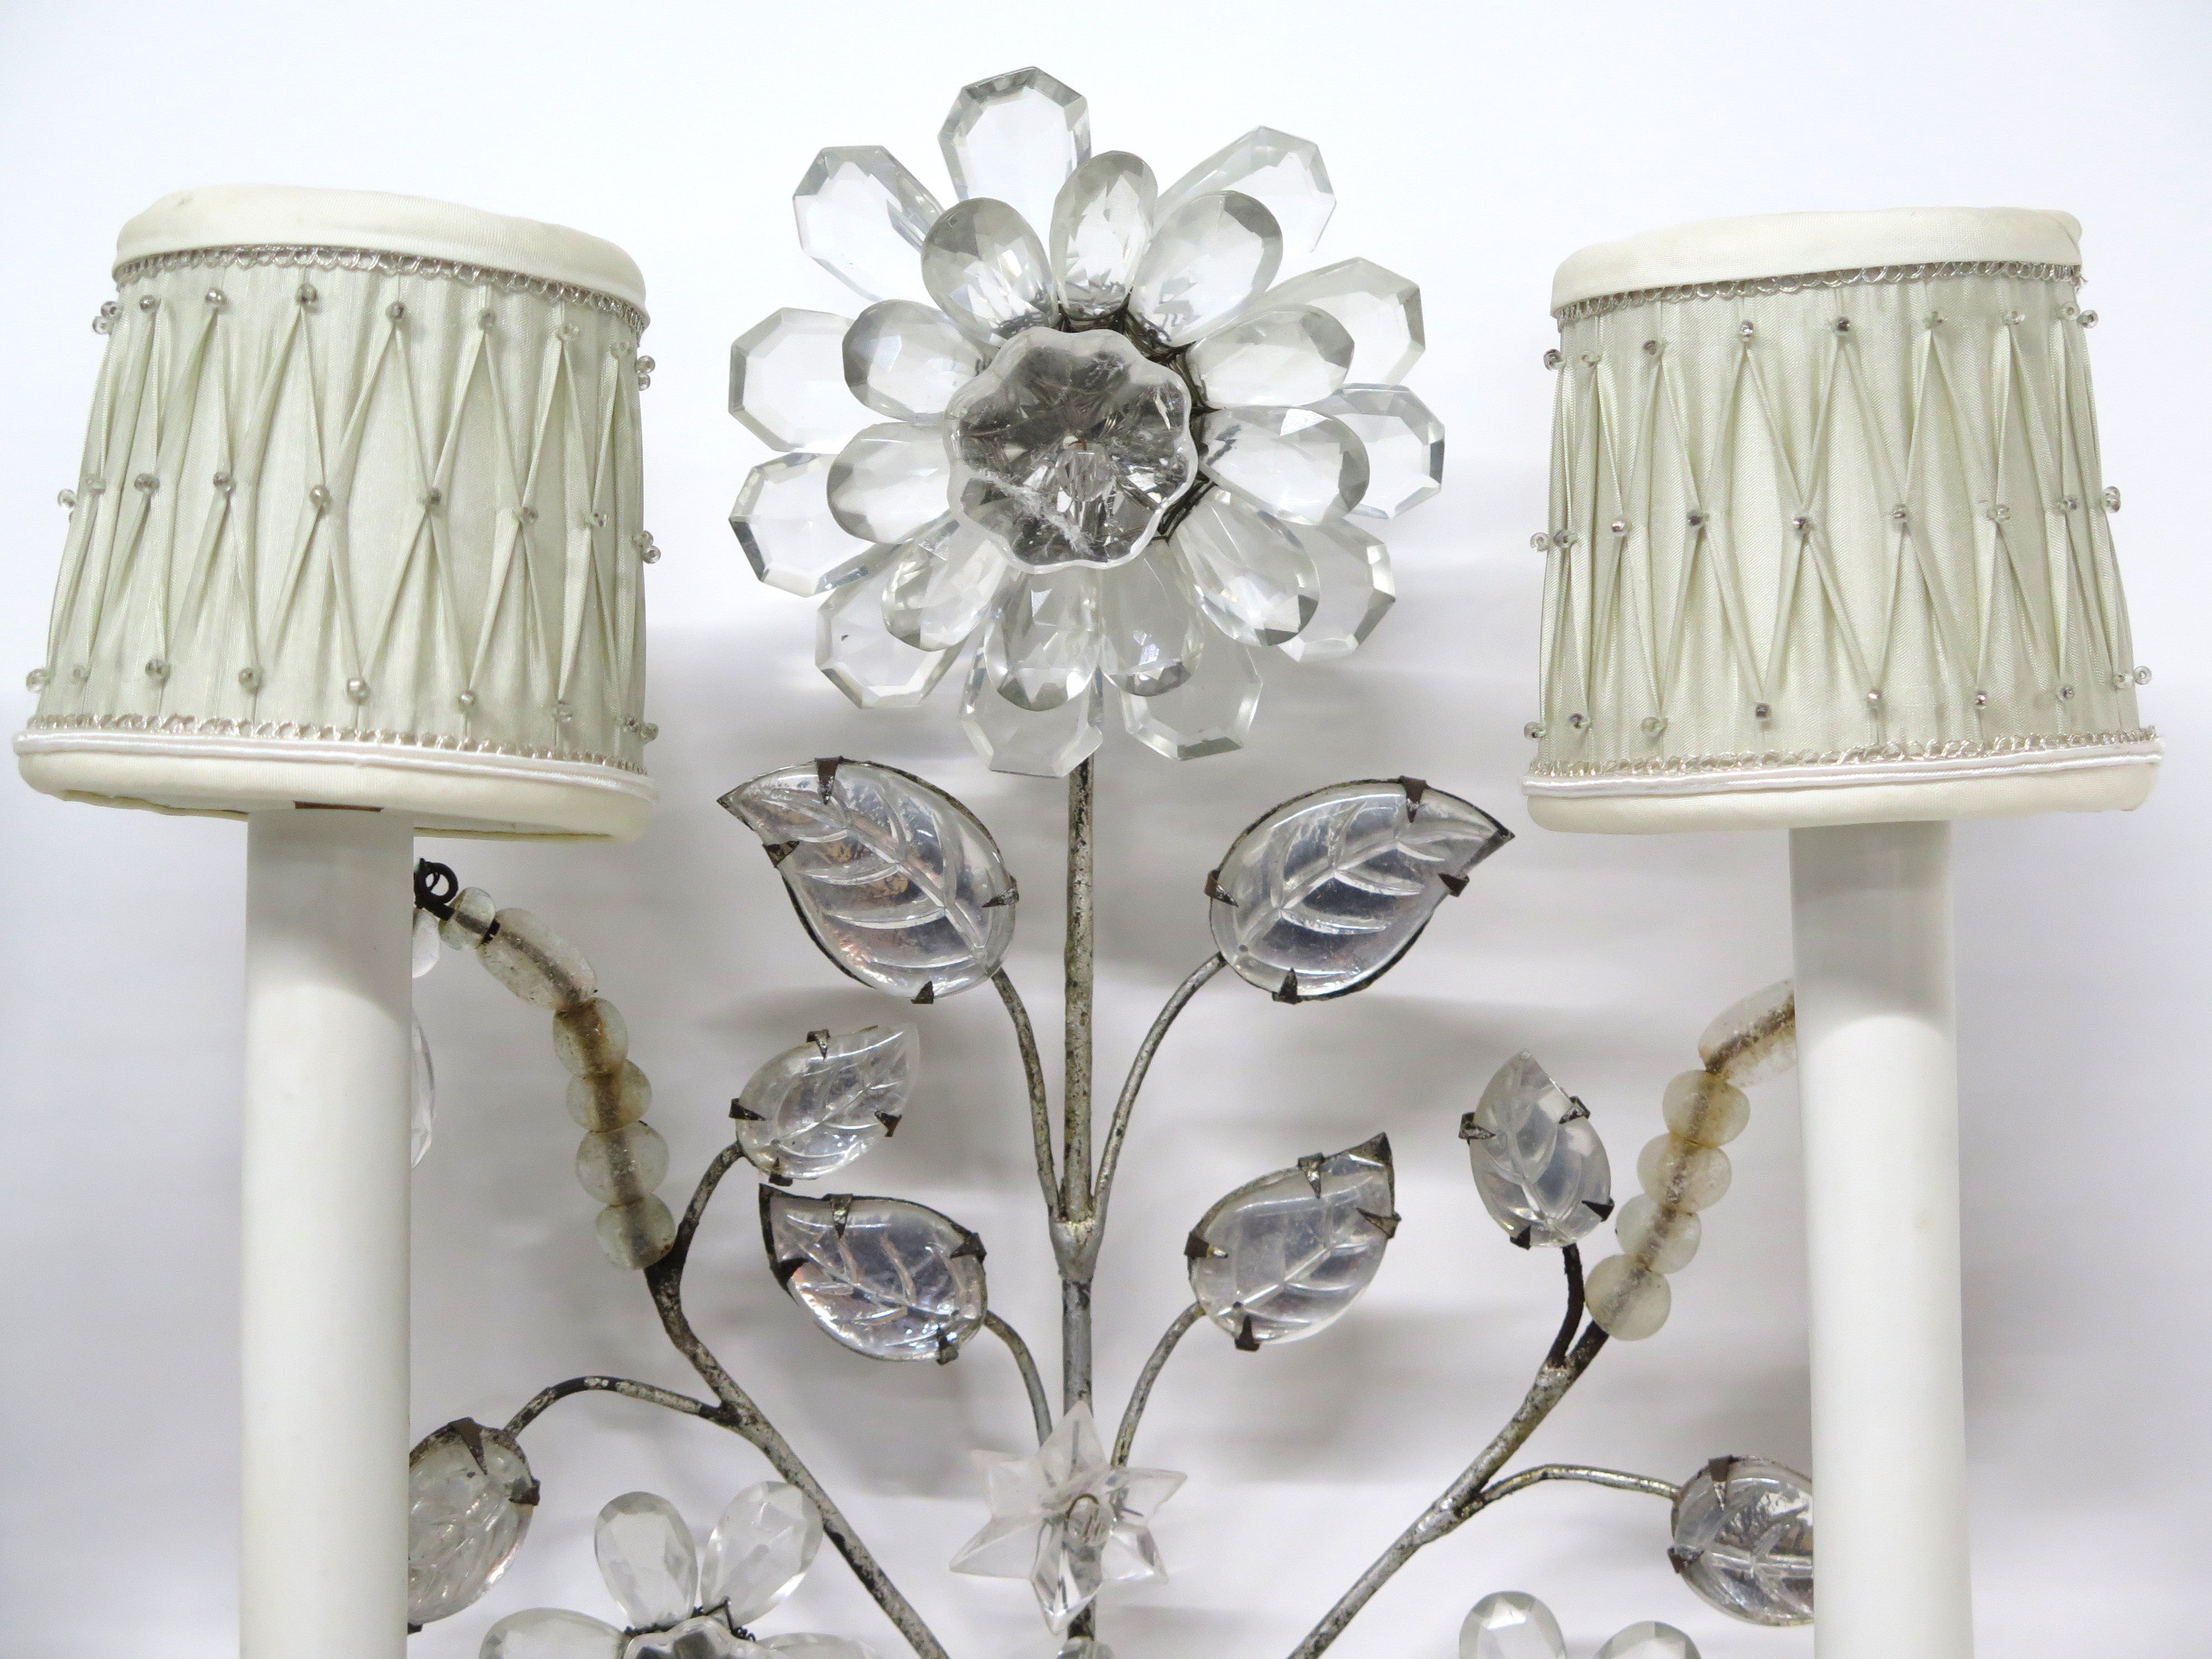 Pair of Maison Bagues Sconces from a William "Billy" Haines Decorated Estate